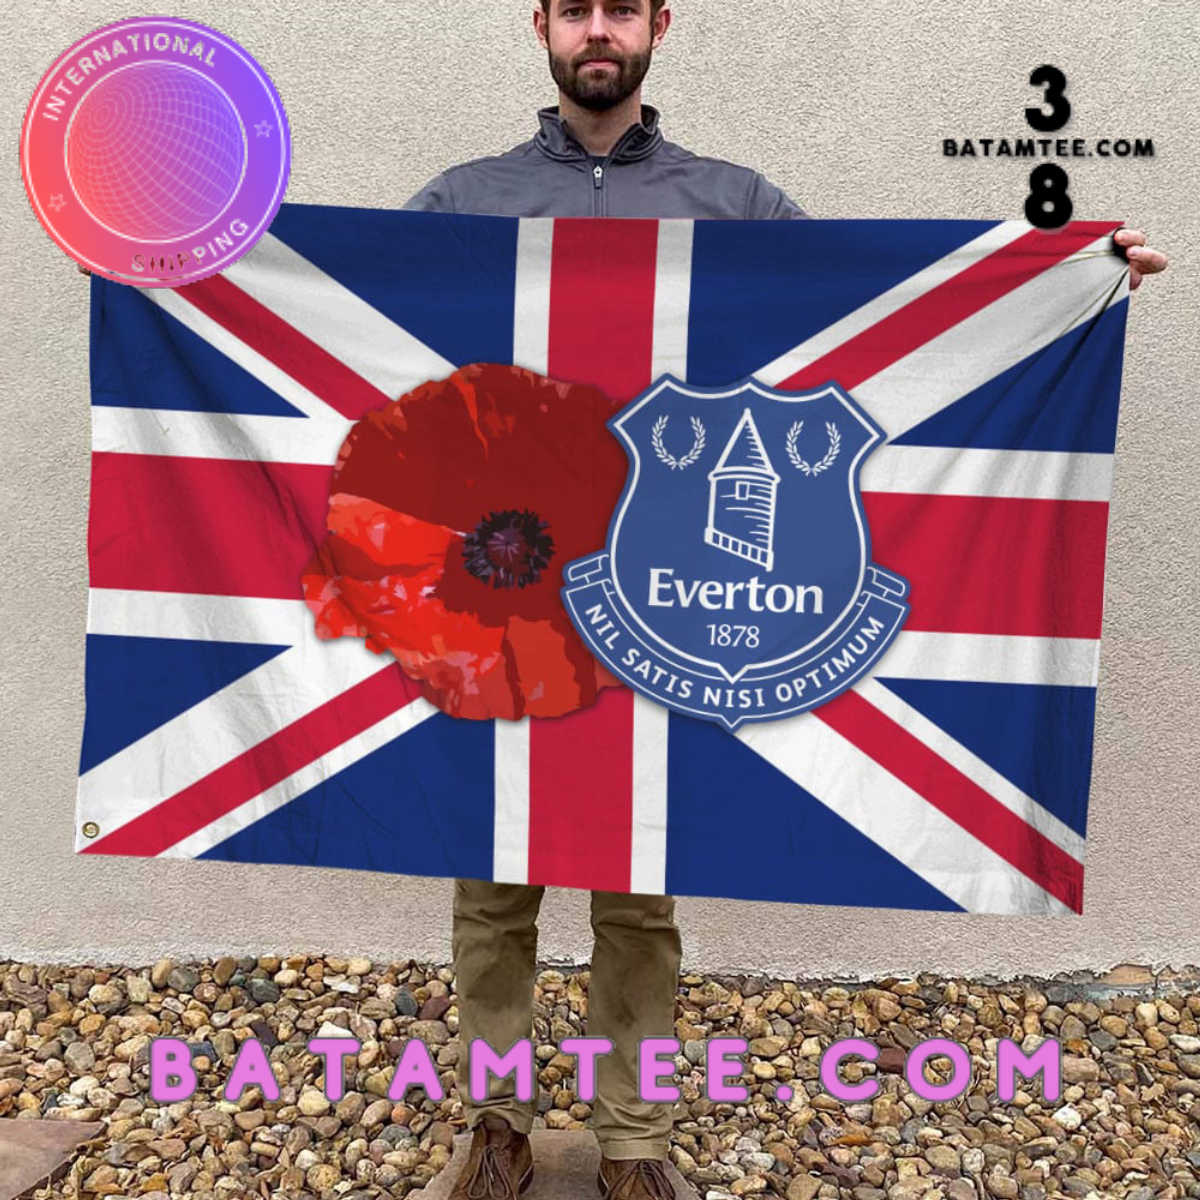 New House Everton FC flag Remembrance day collection - Batamtee Shop ...